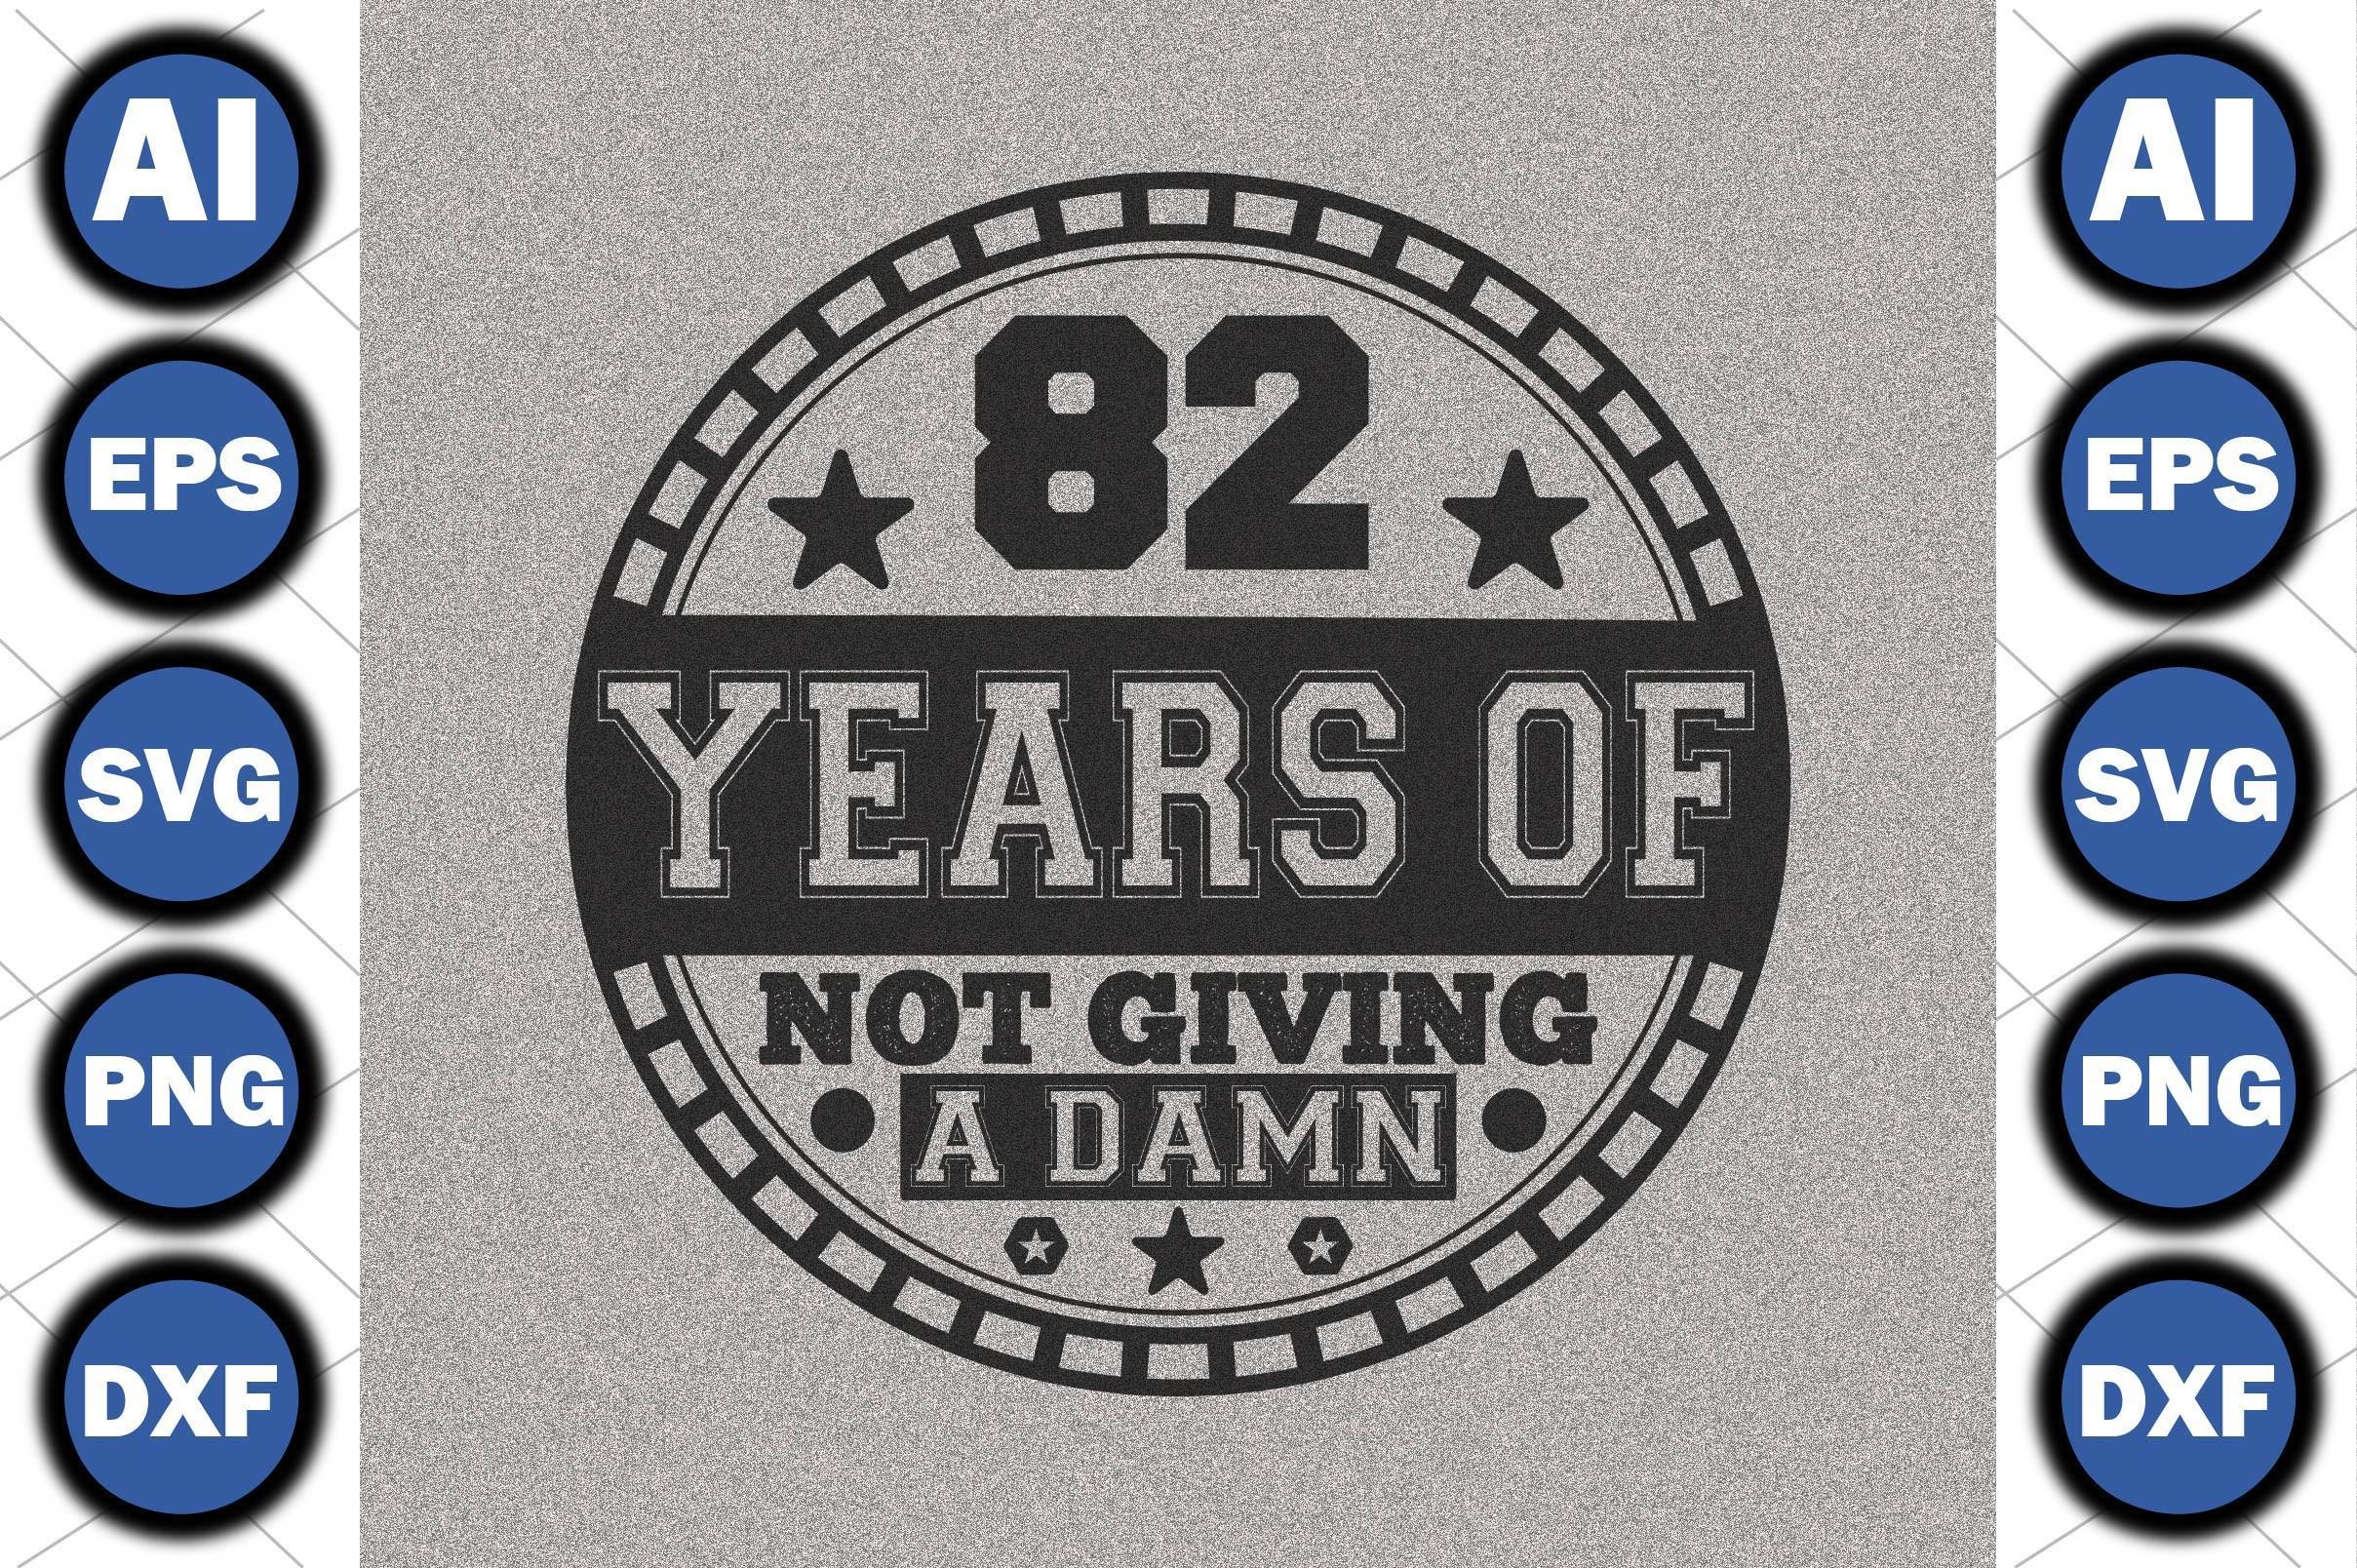 82 Years of Not Giving a Damn